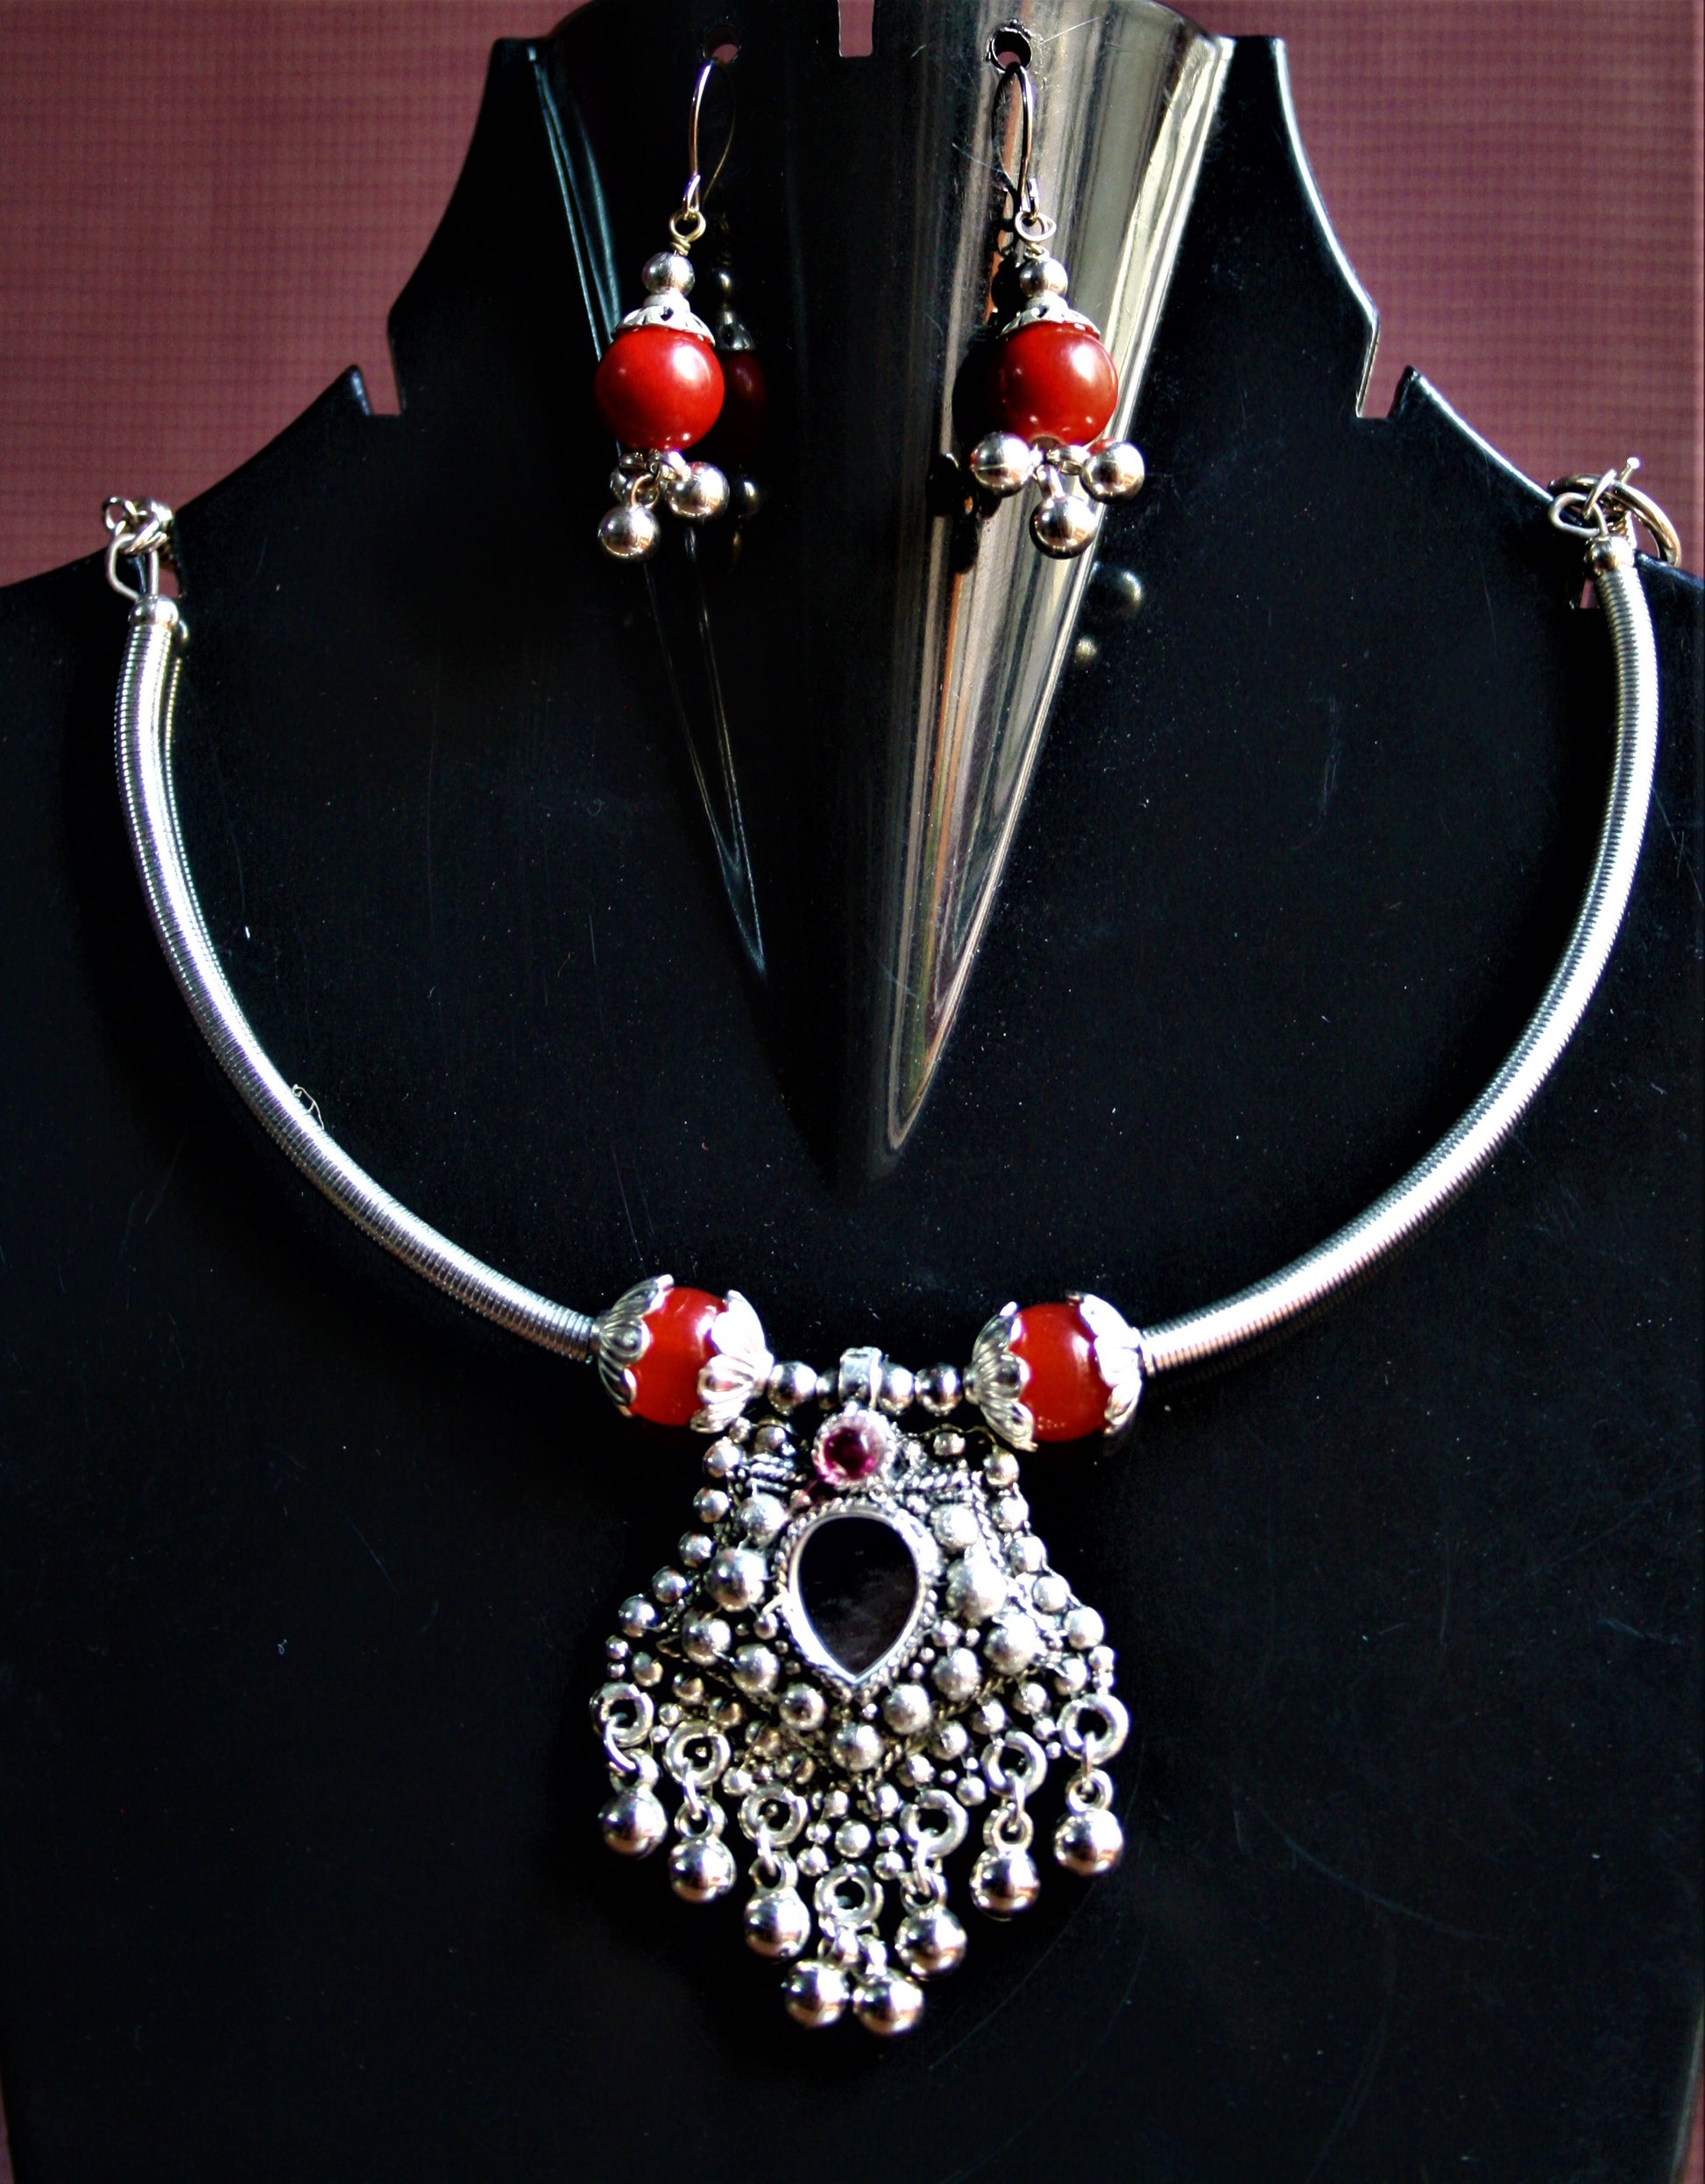 Traditional Choker Necklace with Mirror Pendant and Earrings - GlitterGleam